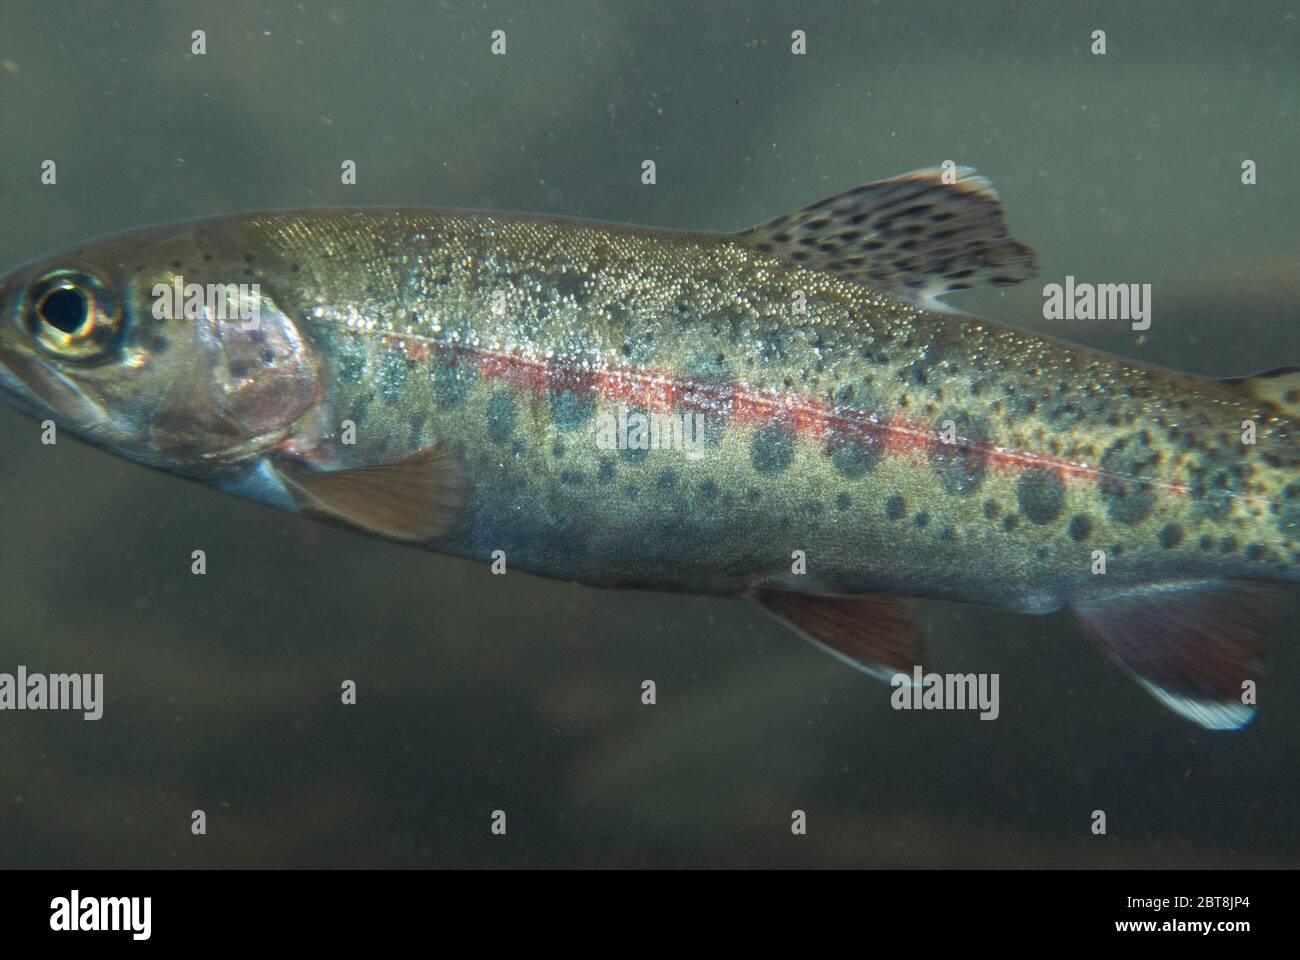 Redband trout (Oncorhynchus mykiss) Stock Photo